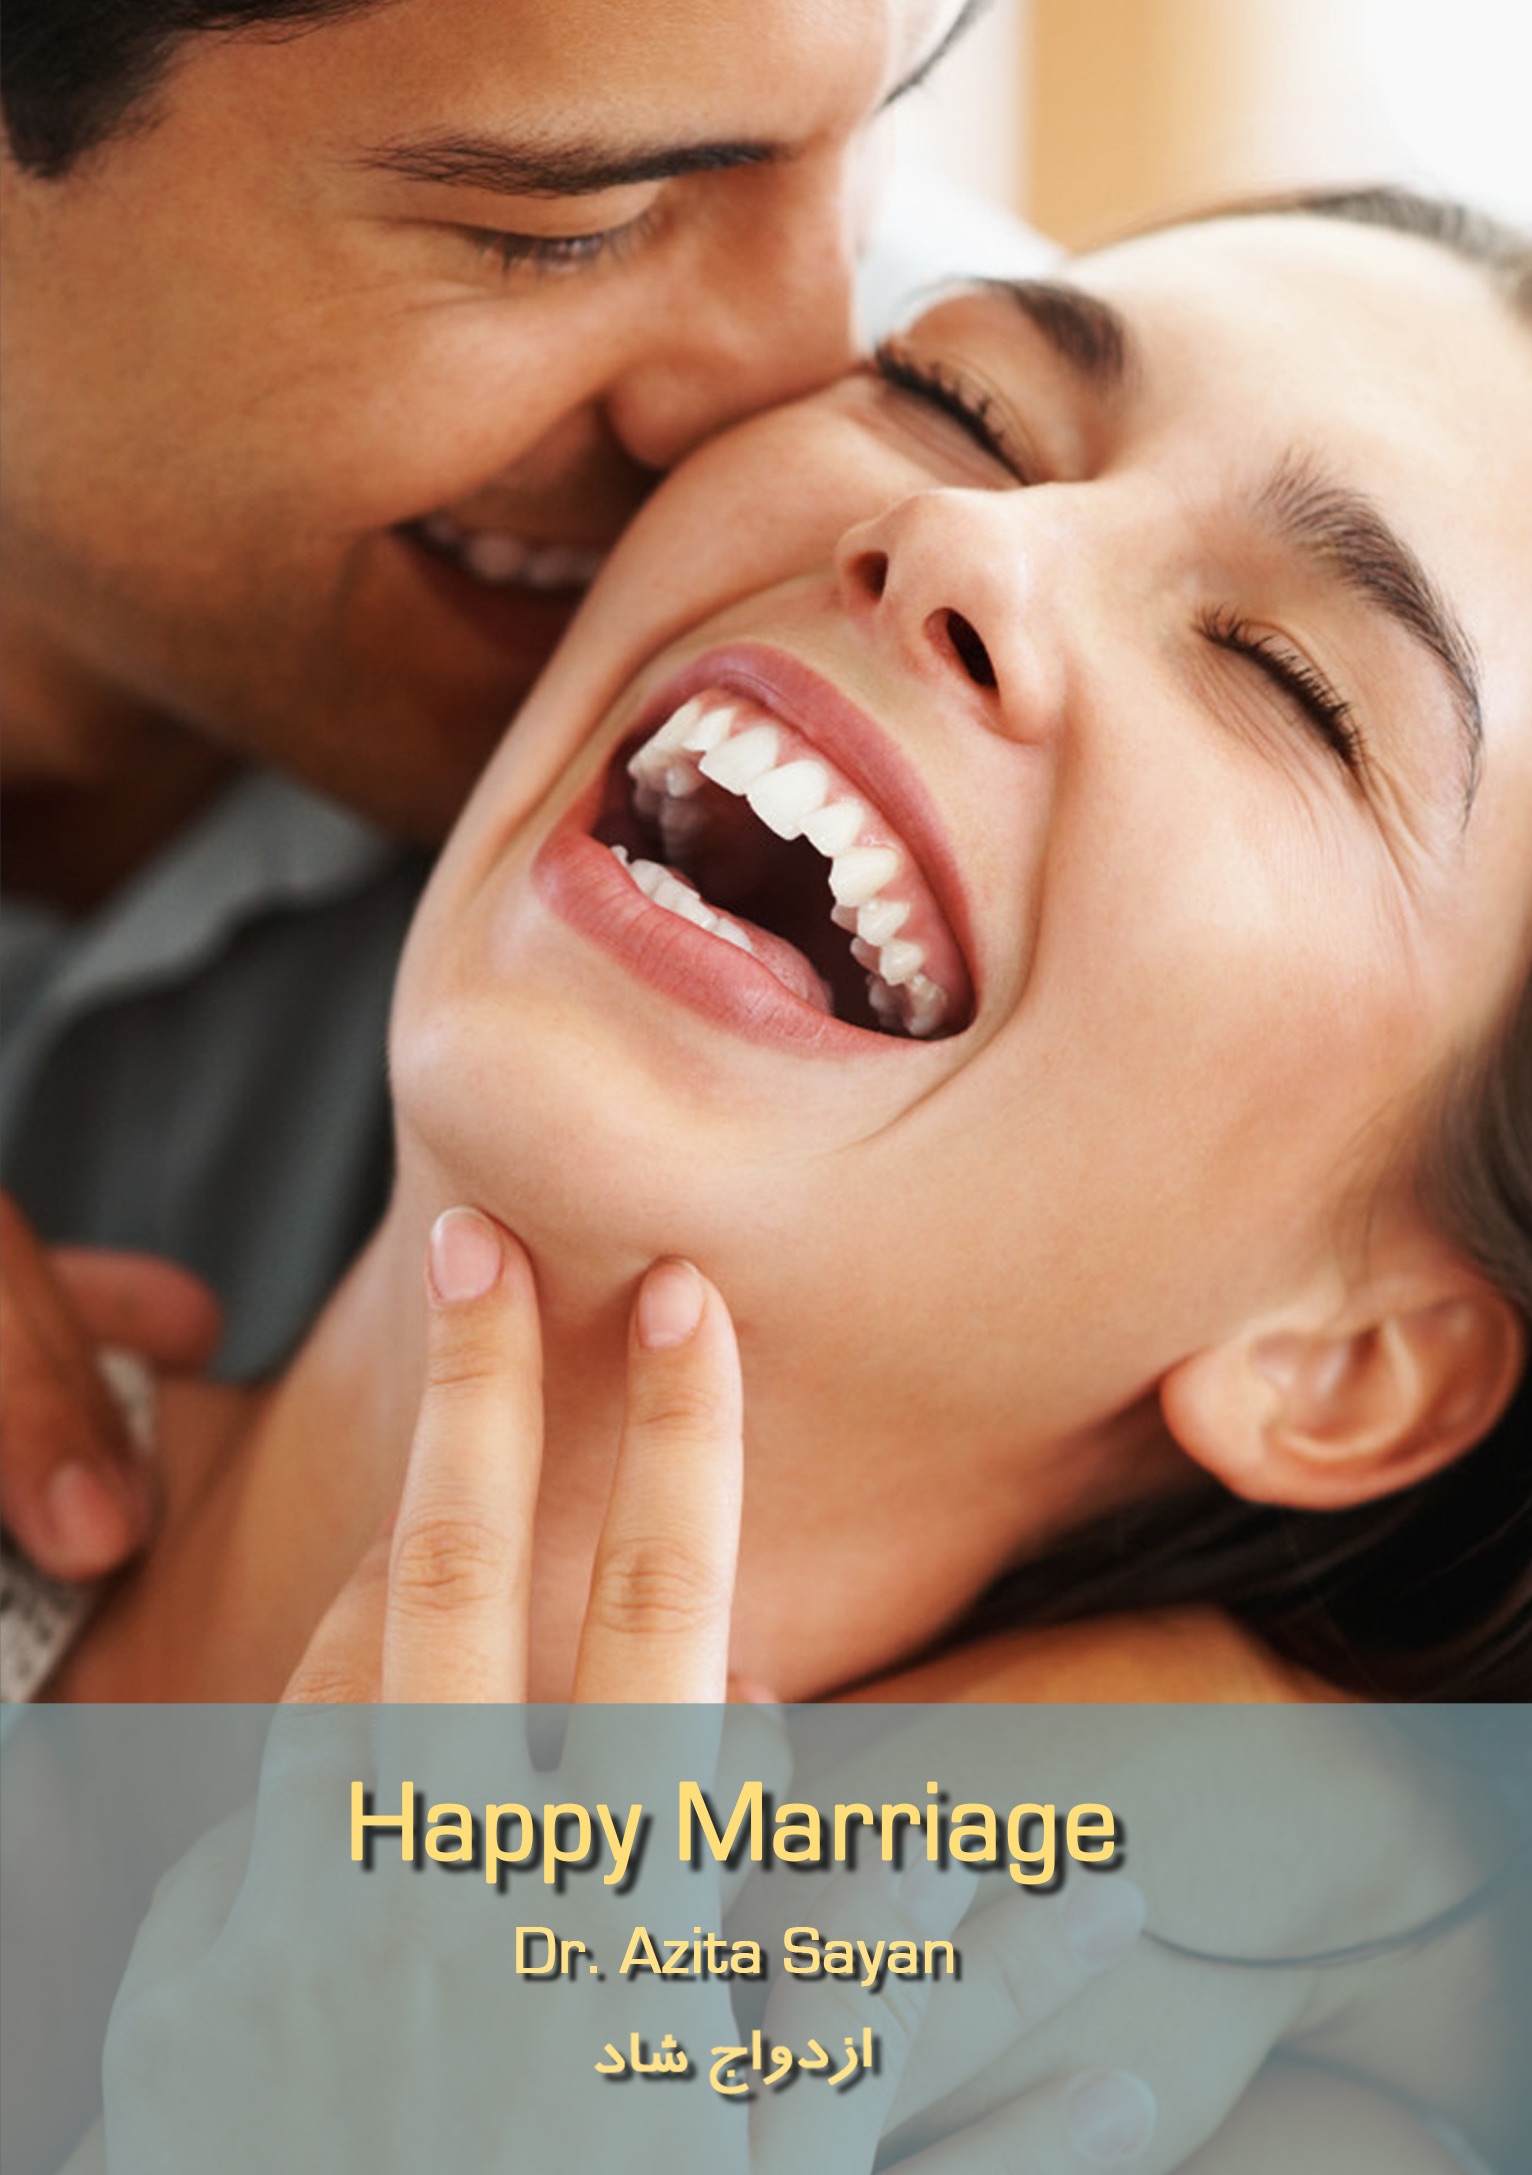 https://embracegrowth.com/wp-content/uploads/2017/10/happy-marriage.jpg